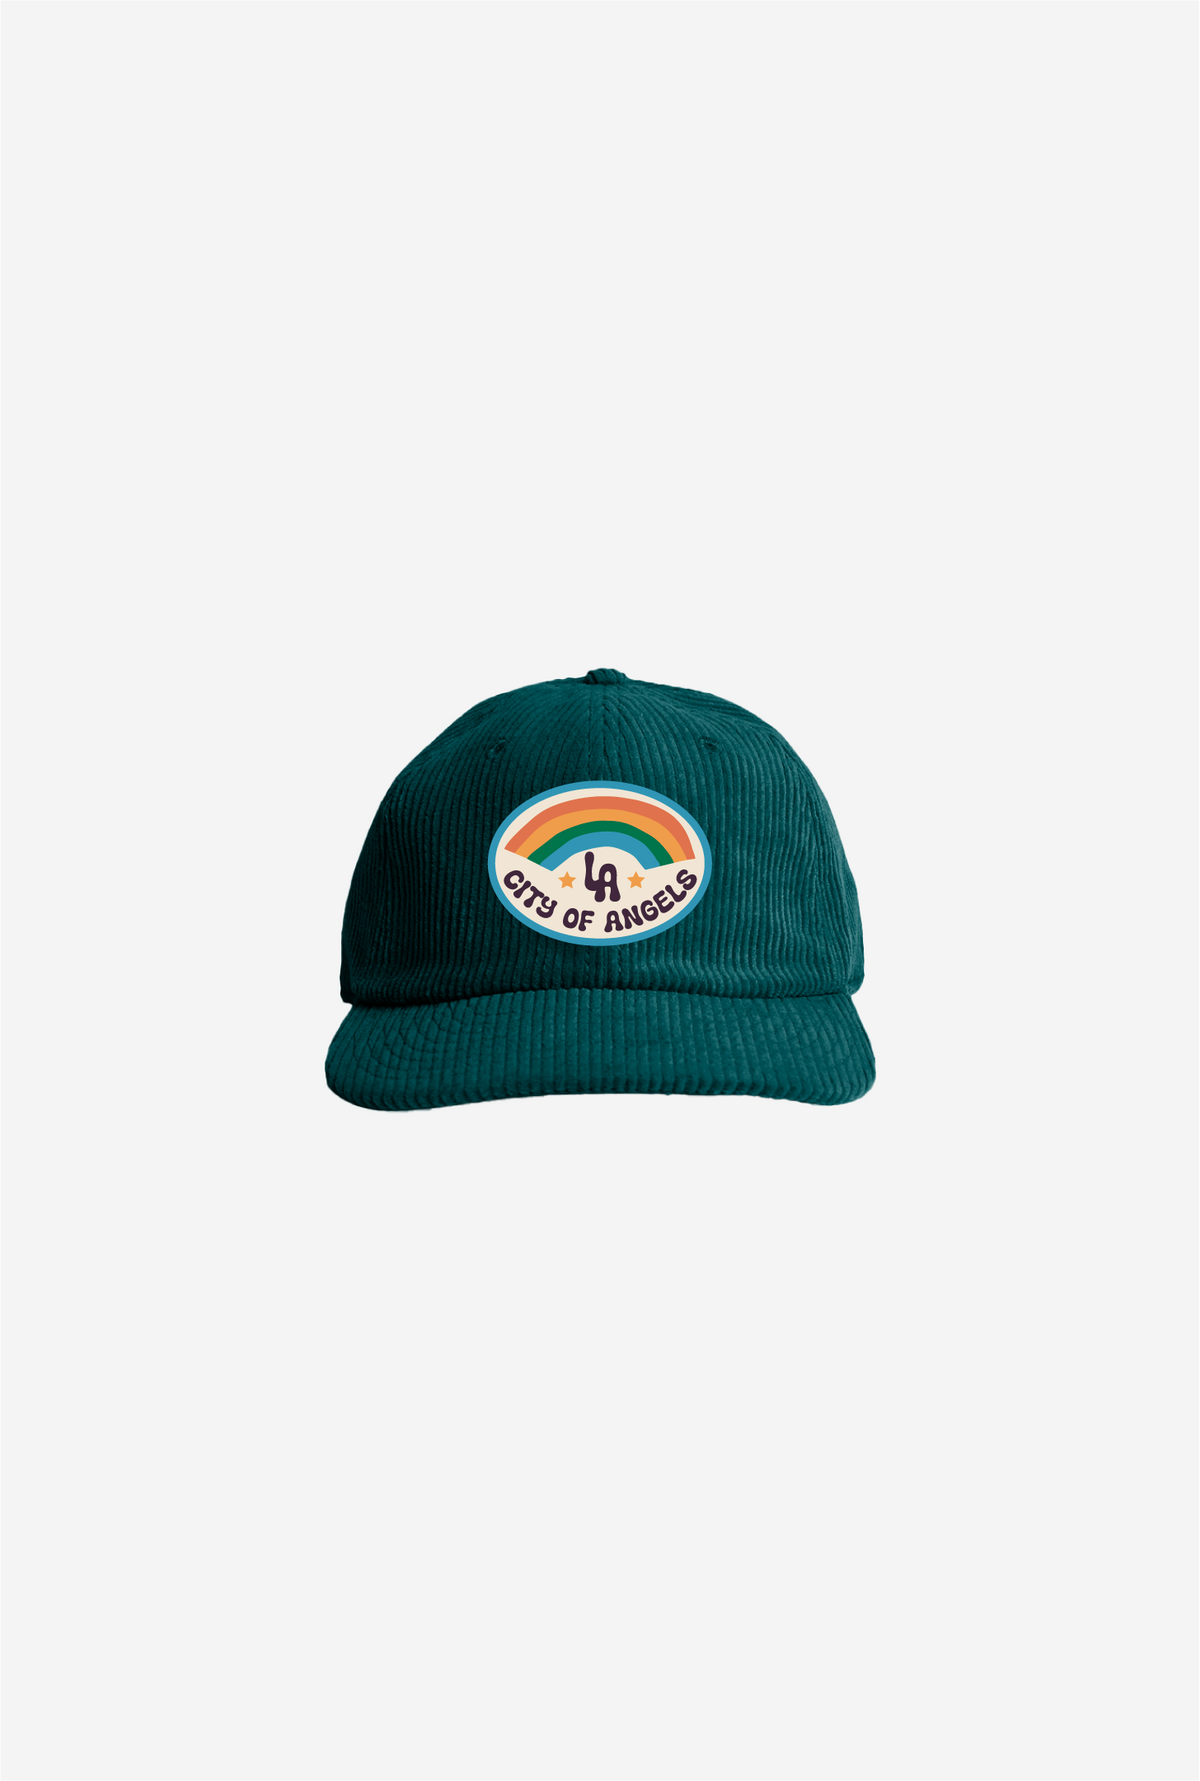 City of Angels Patch Corduroy Cap - Teal